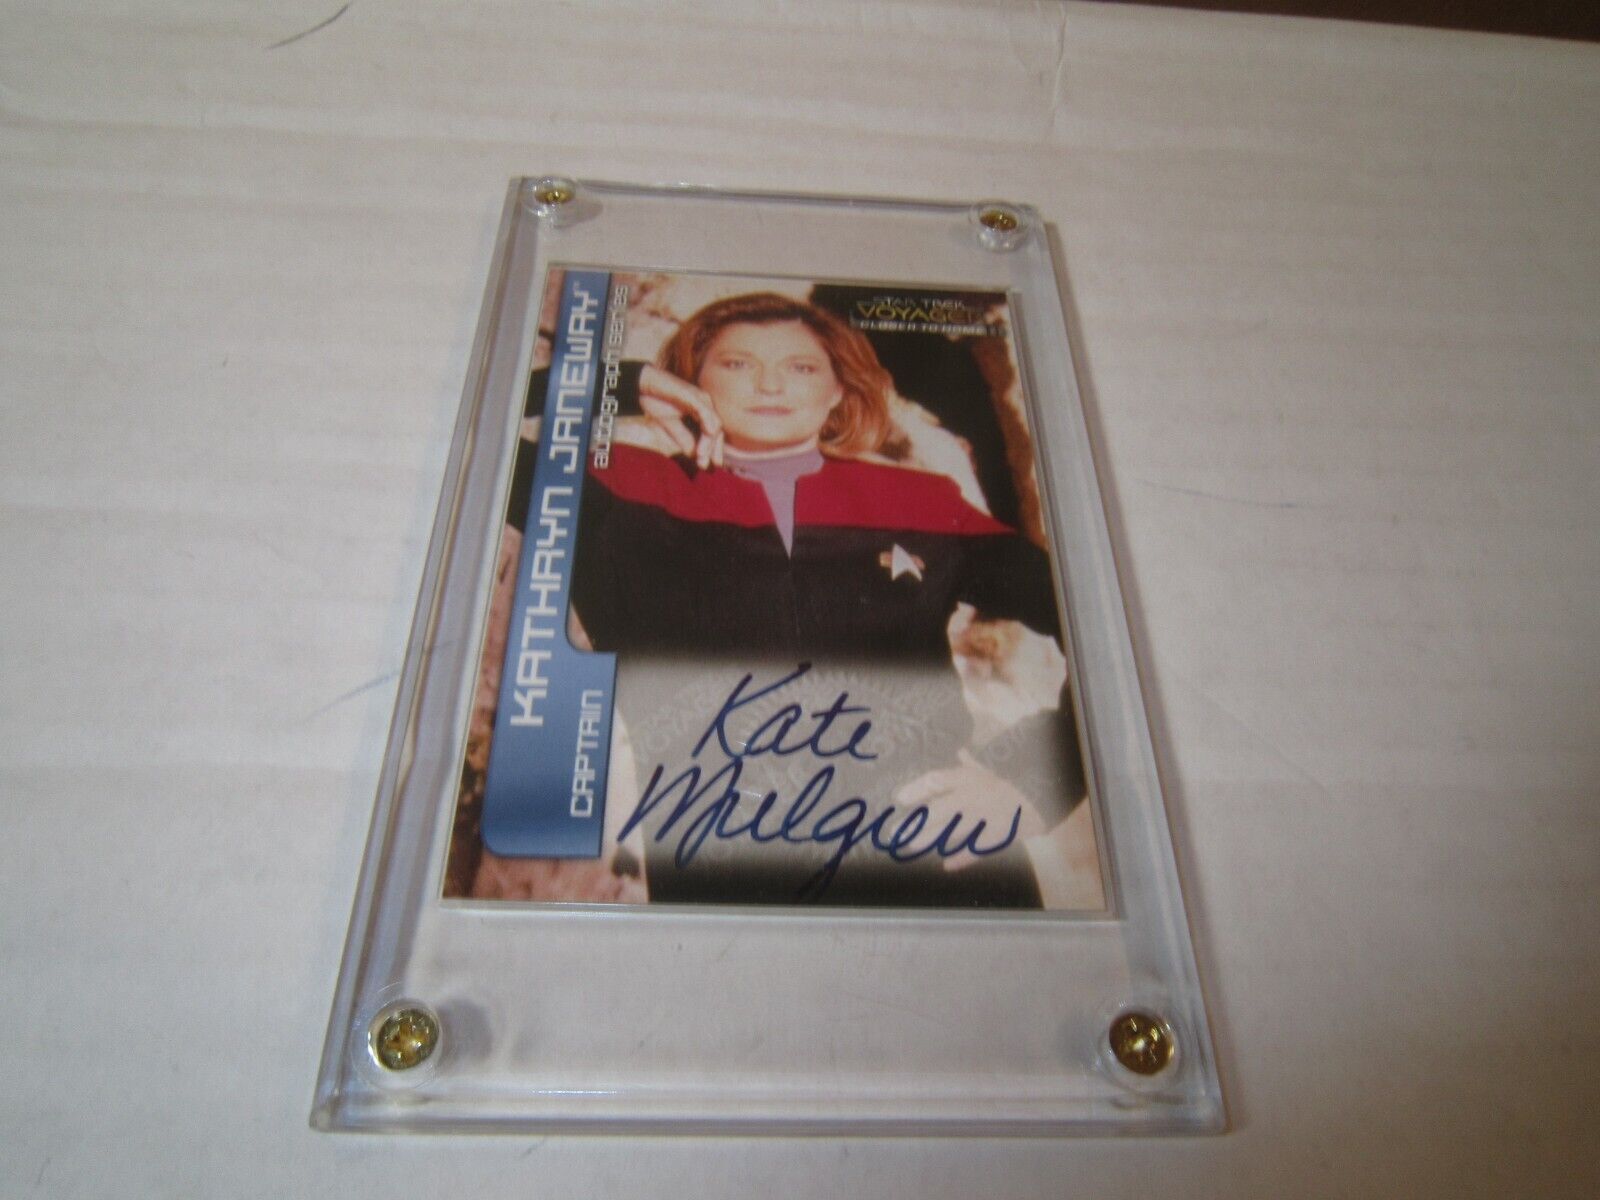 STAR TREK Voyager Closer to Home Autograph A1 Kate Mulgrew as Capt. Janeway